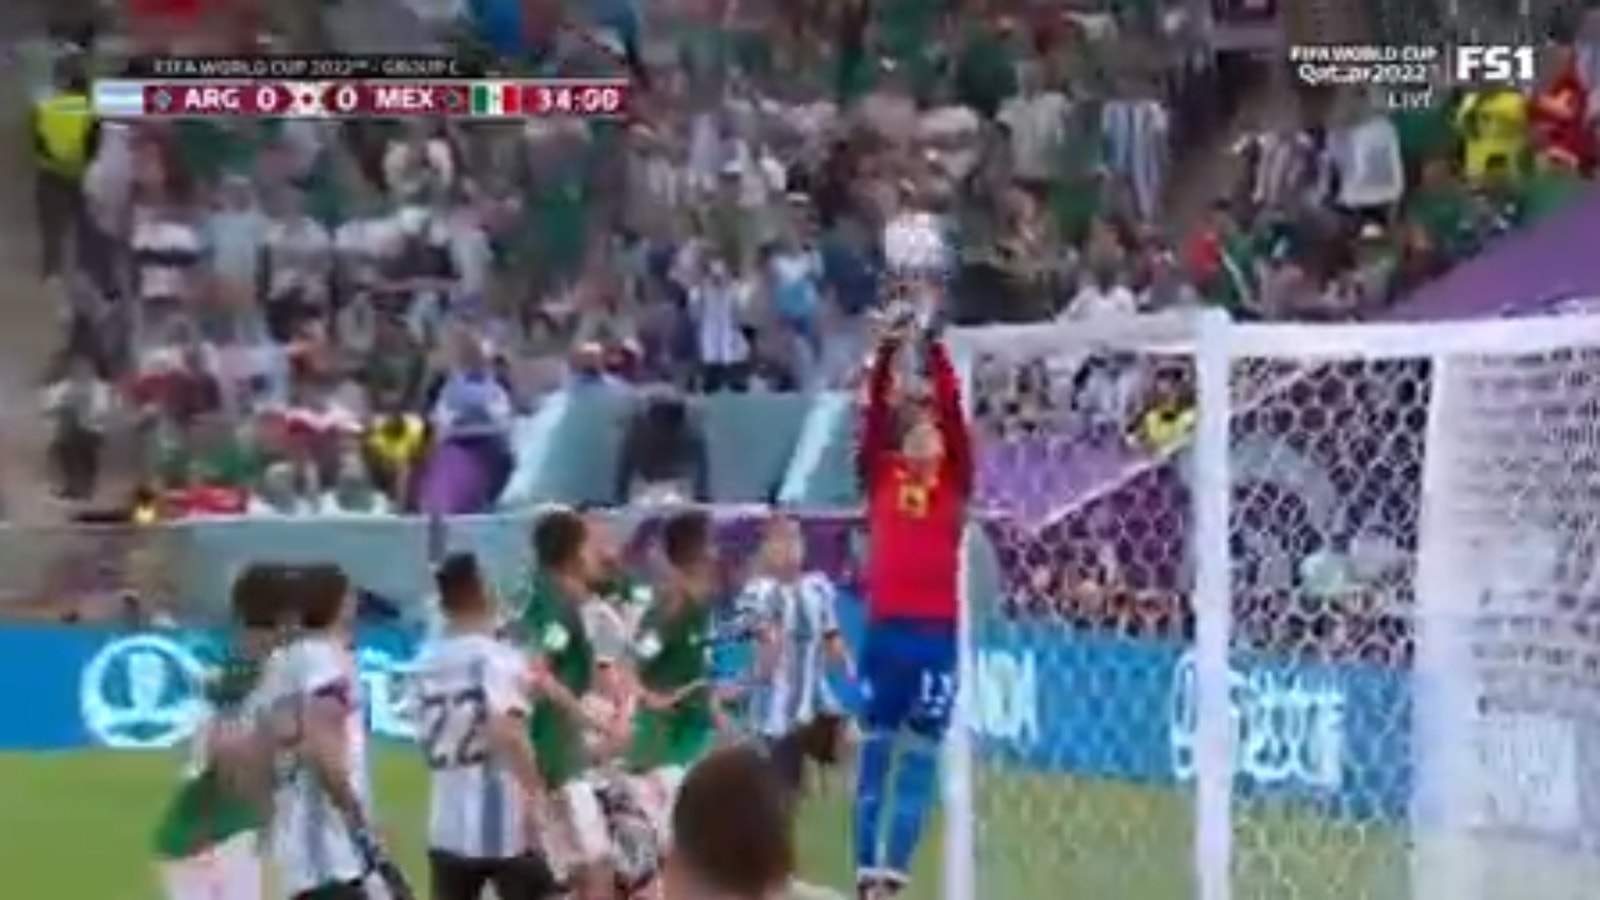 Argentina's Lionel Messi was on the verge of scoring his first goal of the game but was punched away by Ochoa